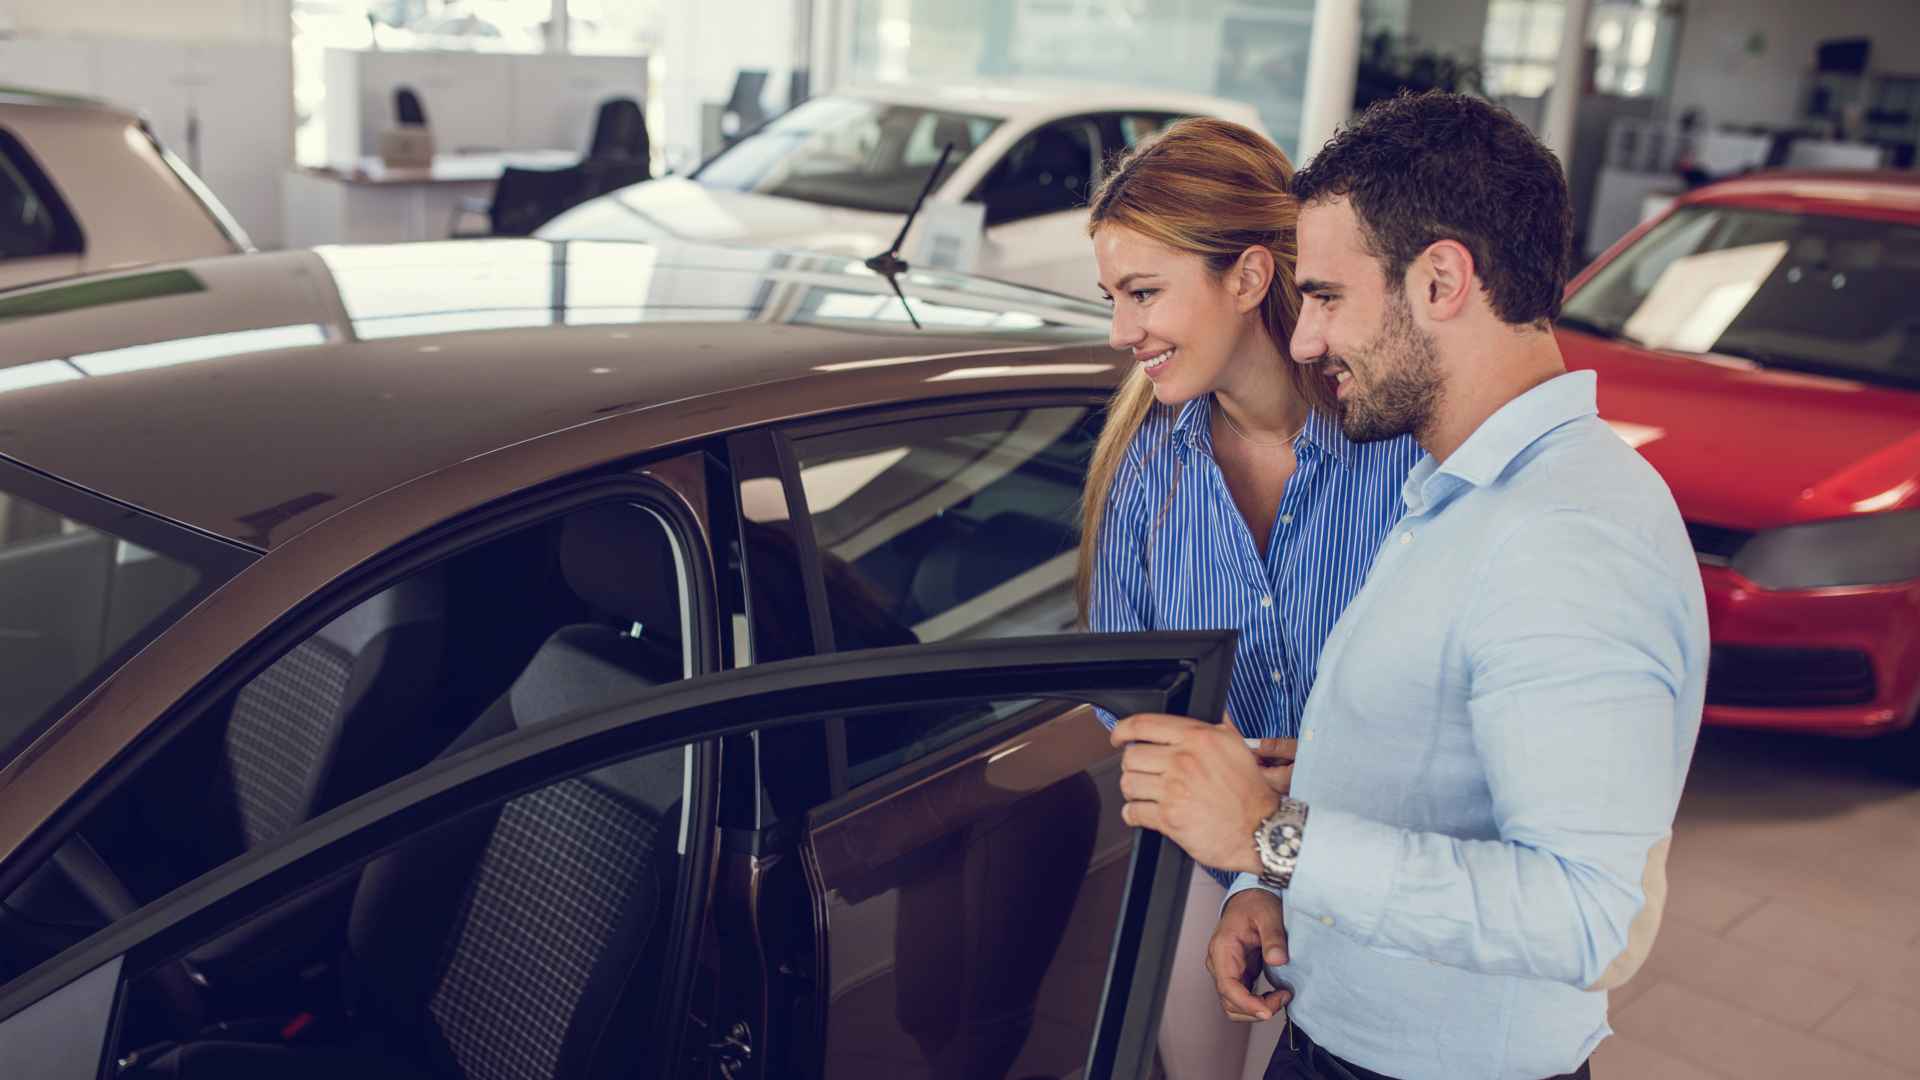 professional negotiator shares 4 tips to save thousands on your next car purchase